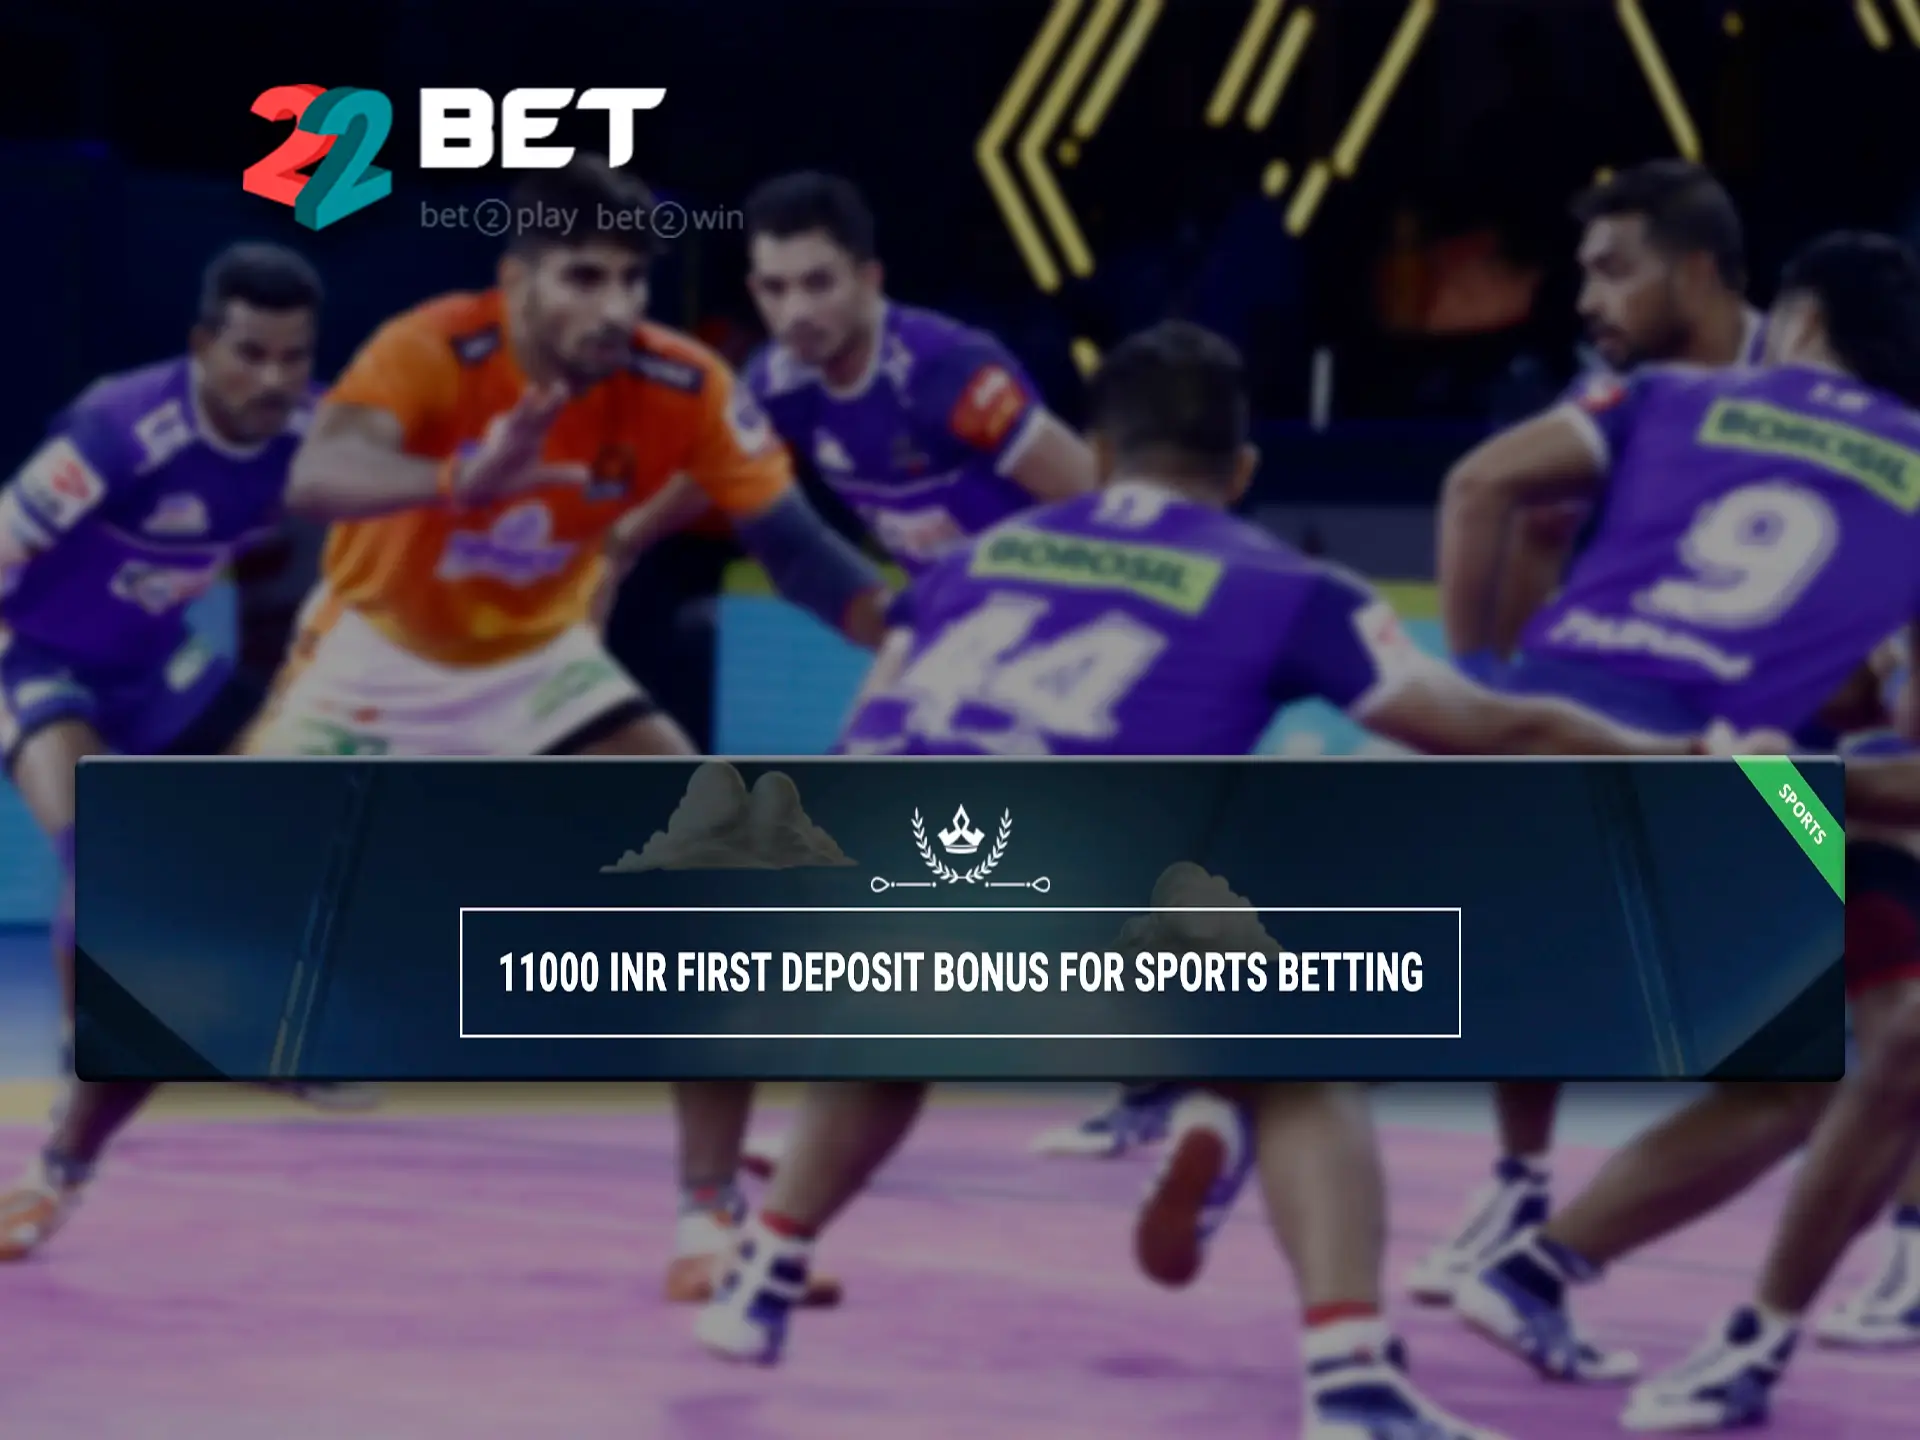 At 22Bet there are plenty of bonuses for you to win big when betting on Kabaddi.